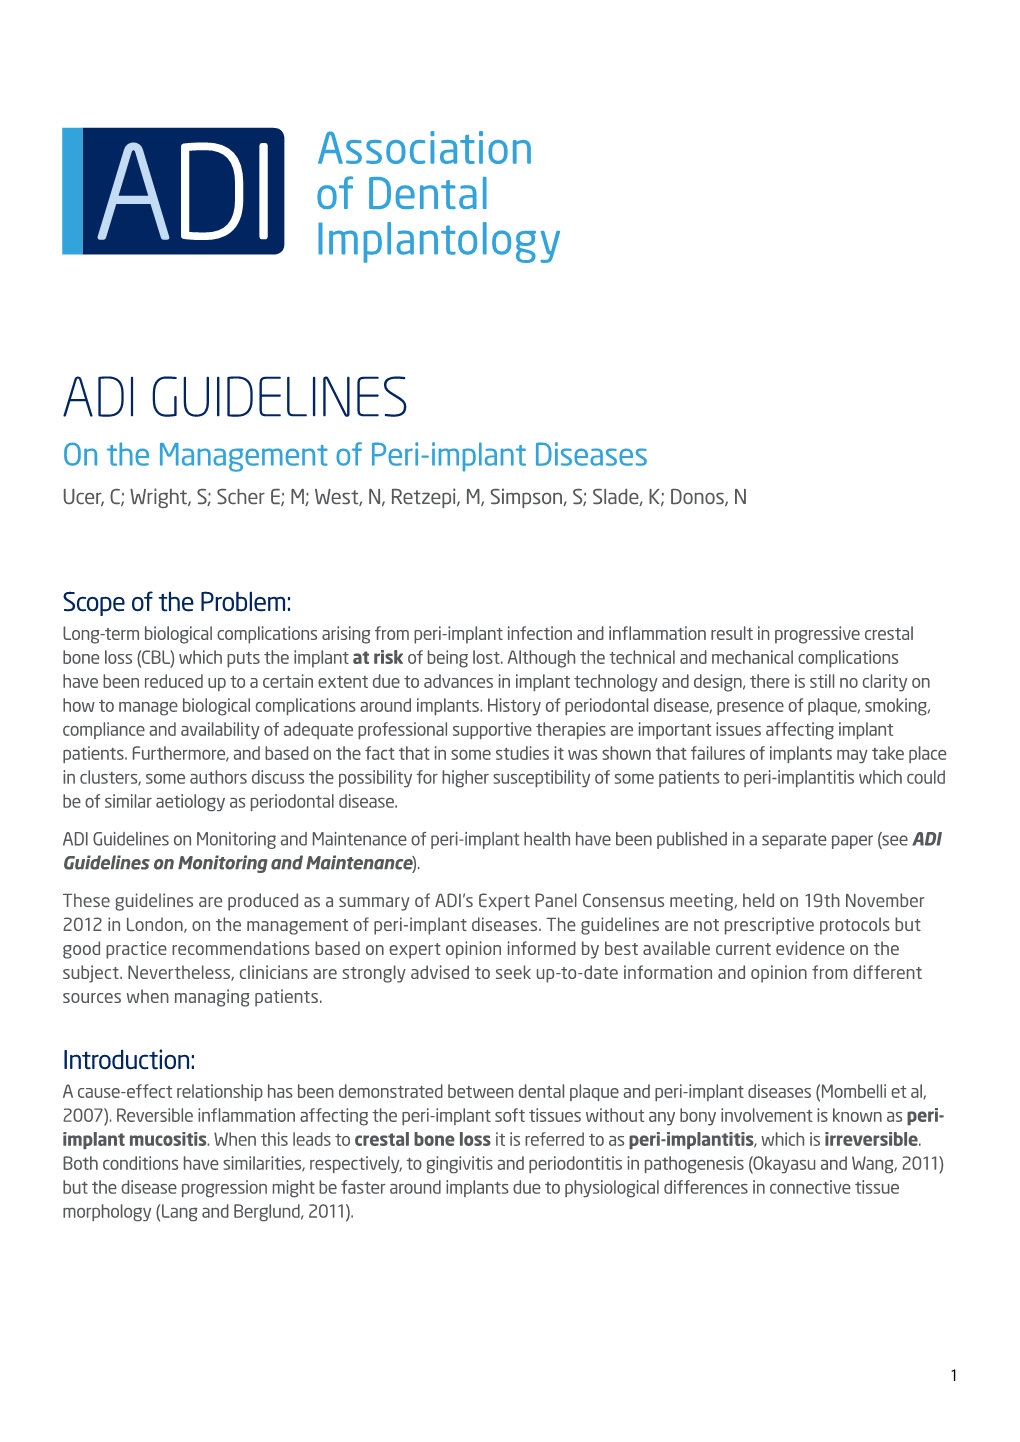 ADI GUIDELINES on the Management of Peri-Implant Diseases Ucer, C; Wright, S; Scher E; M; West, N, Retzepi, M, Simpson, S; Slade, K; Donos, N